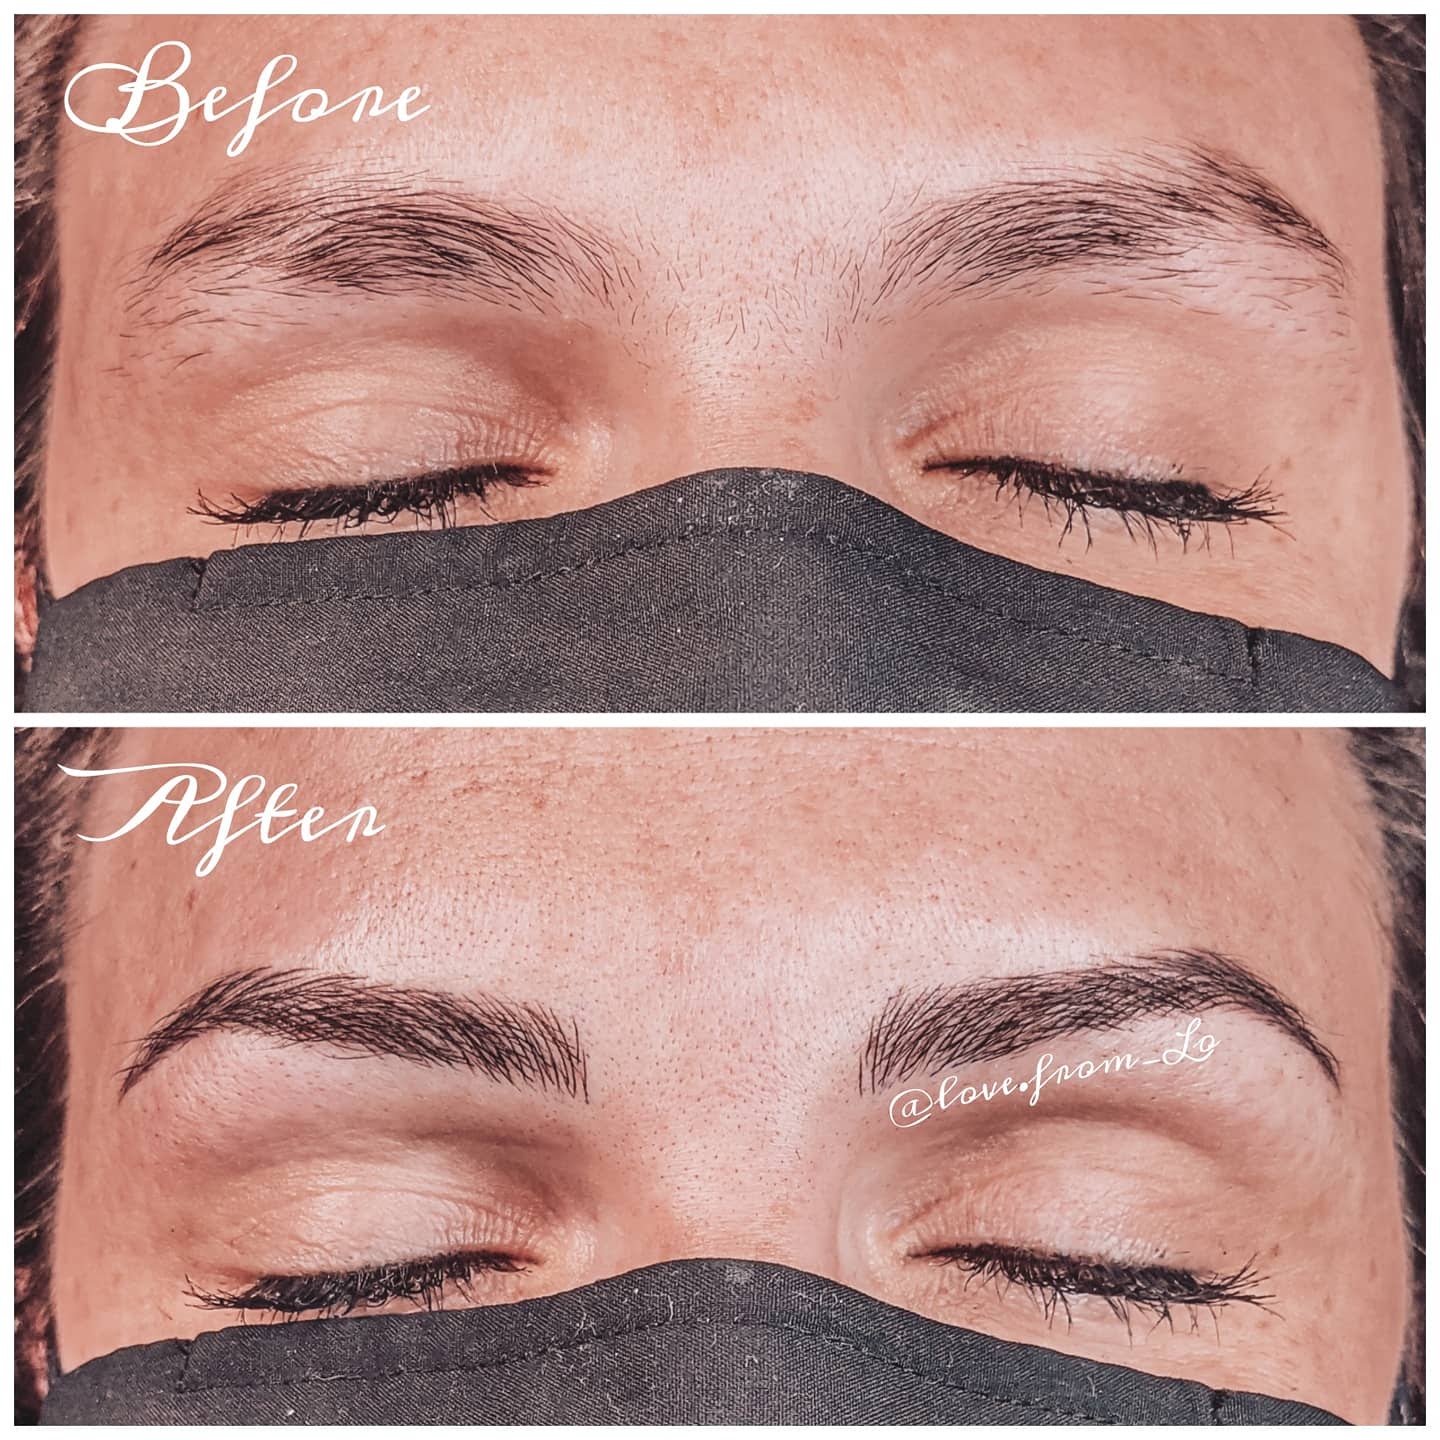 Microblading by Lo at Bewitched Esthetics in Boise, Idaho